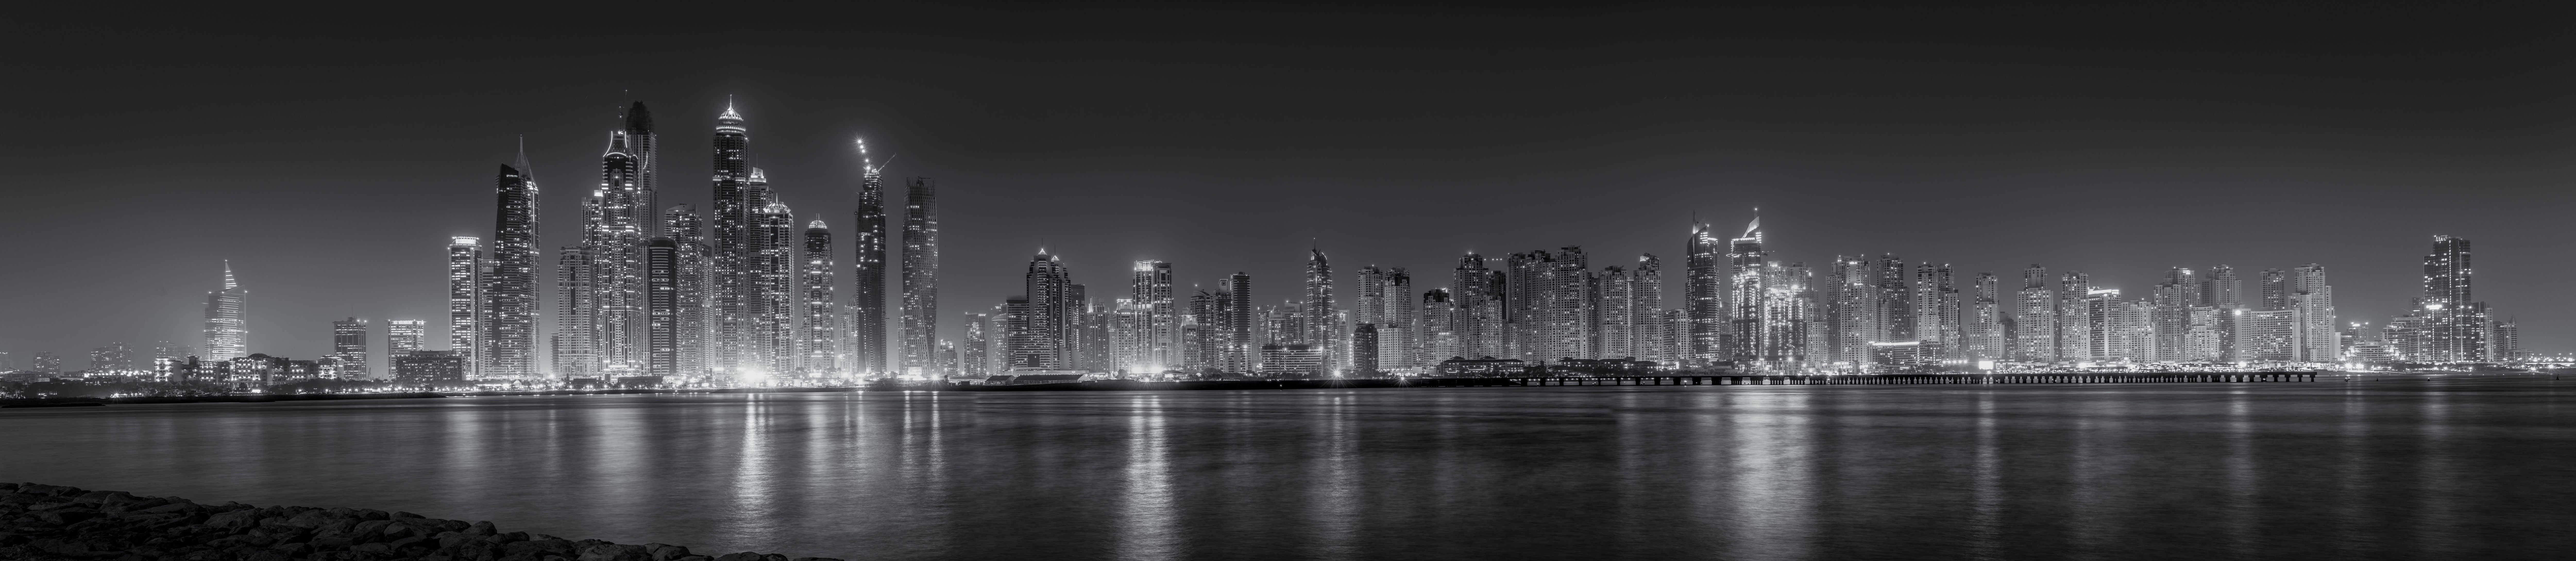 Spectacular Monochrome View Of A Dark City In 4k Ultra Hd Wallpaper